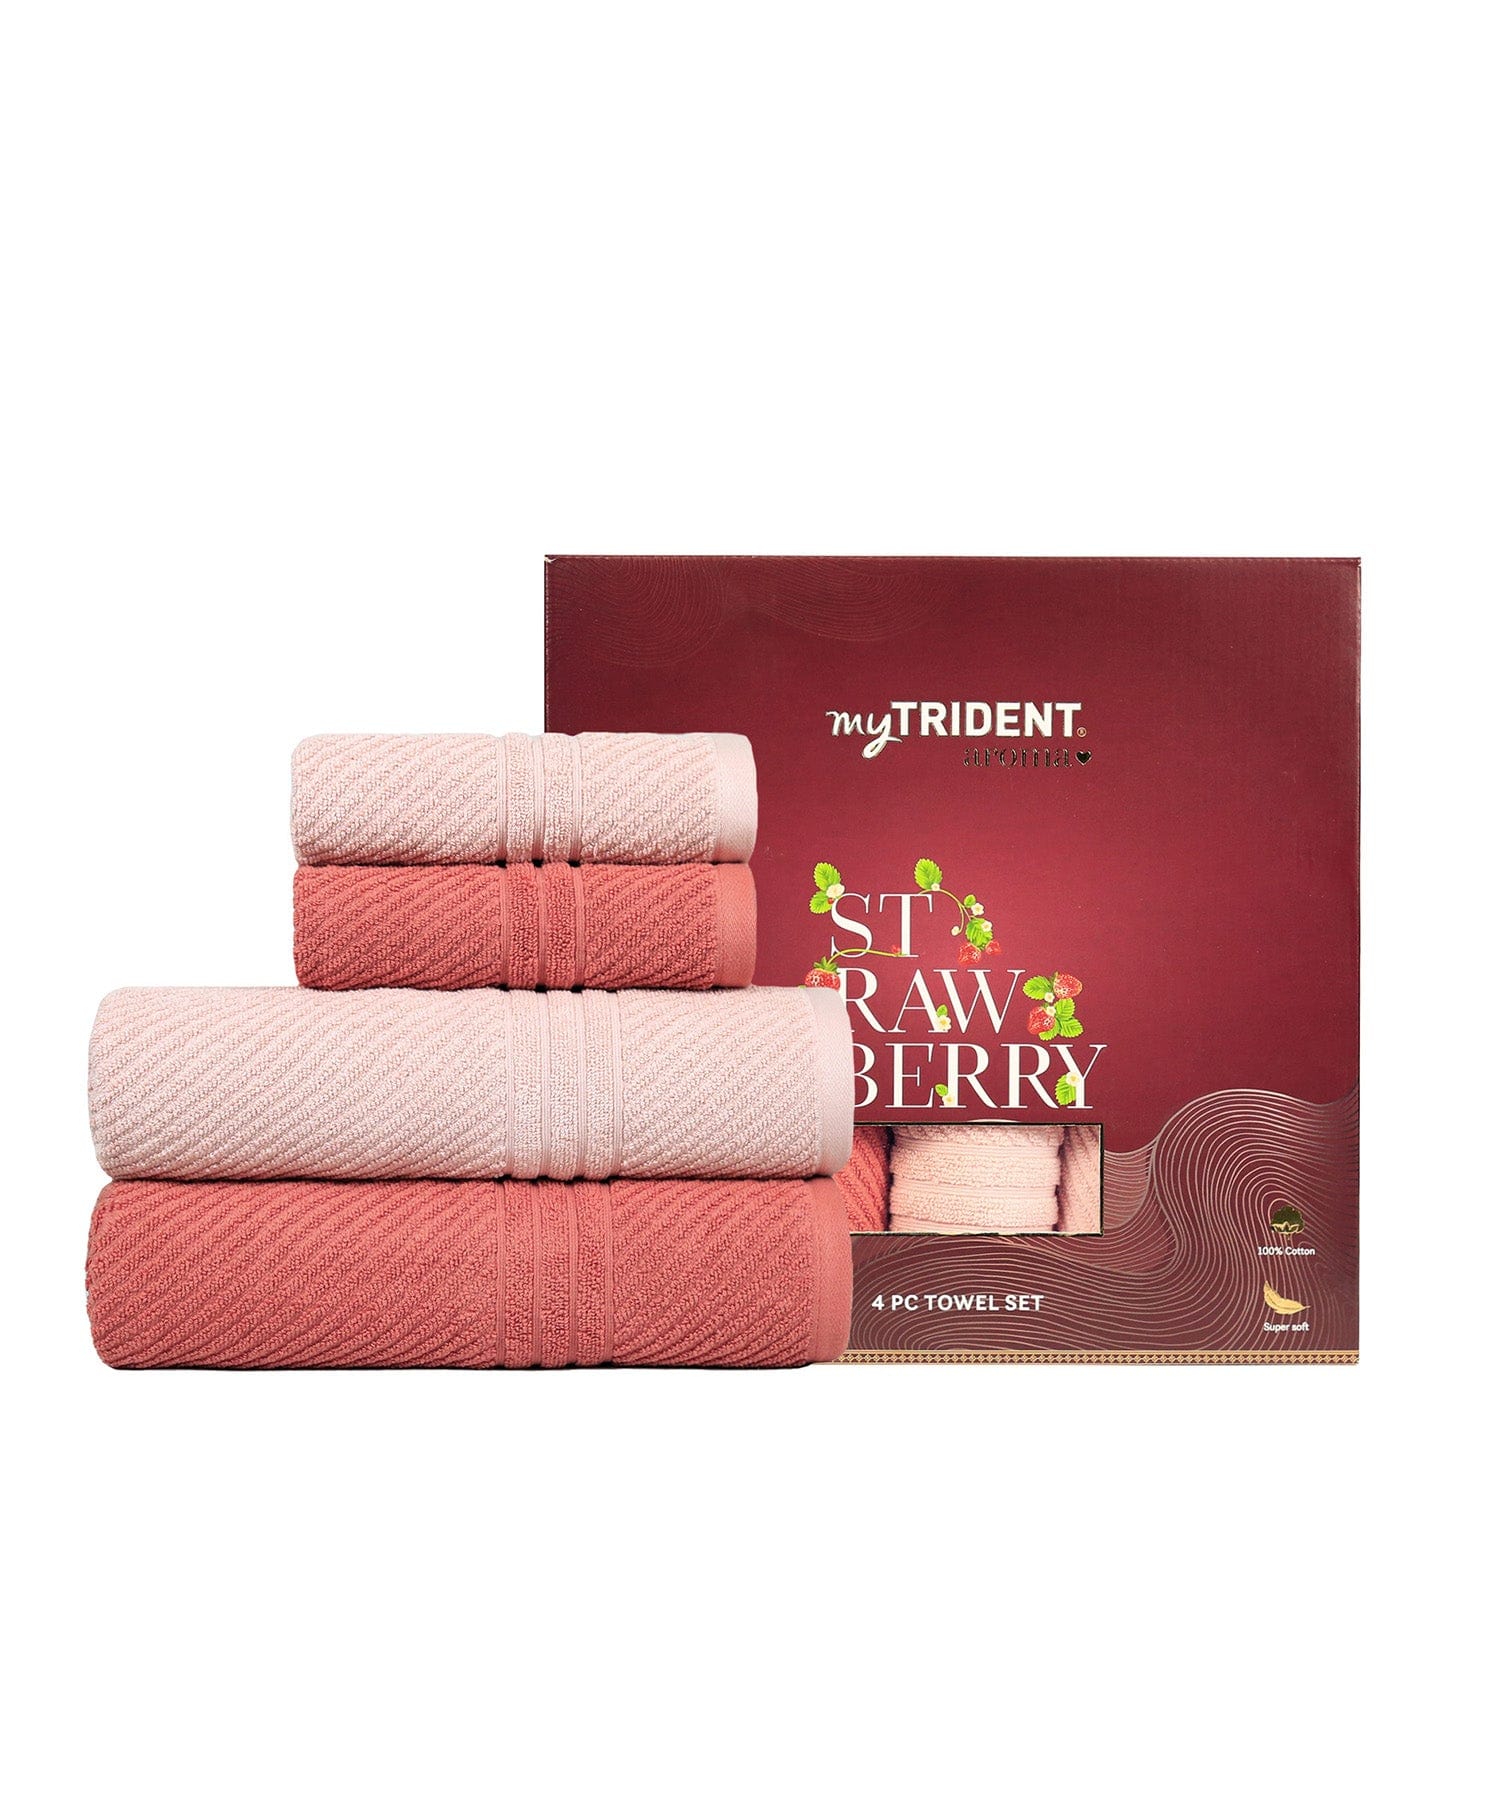 AROMA TOWEL,100% Cotton,Durable,Super Soft, STAWBERRY